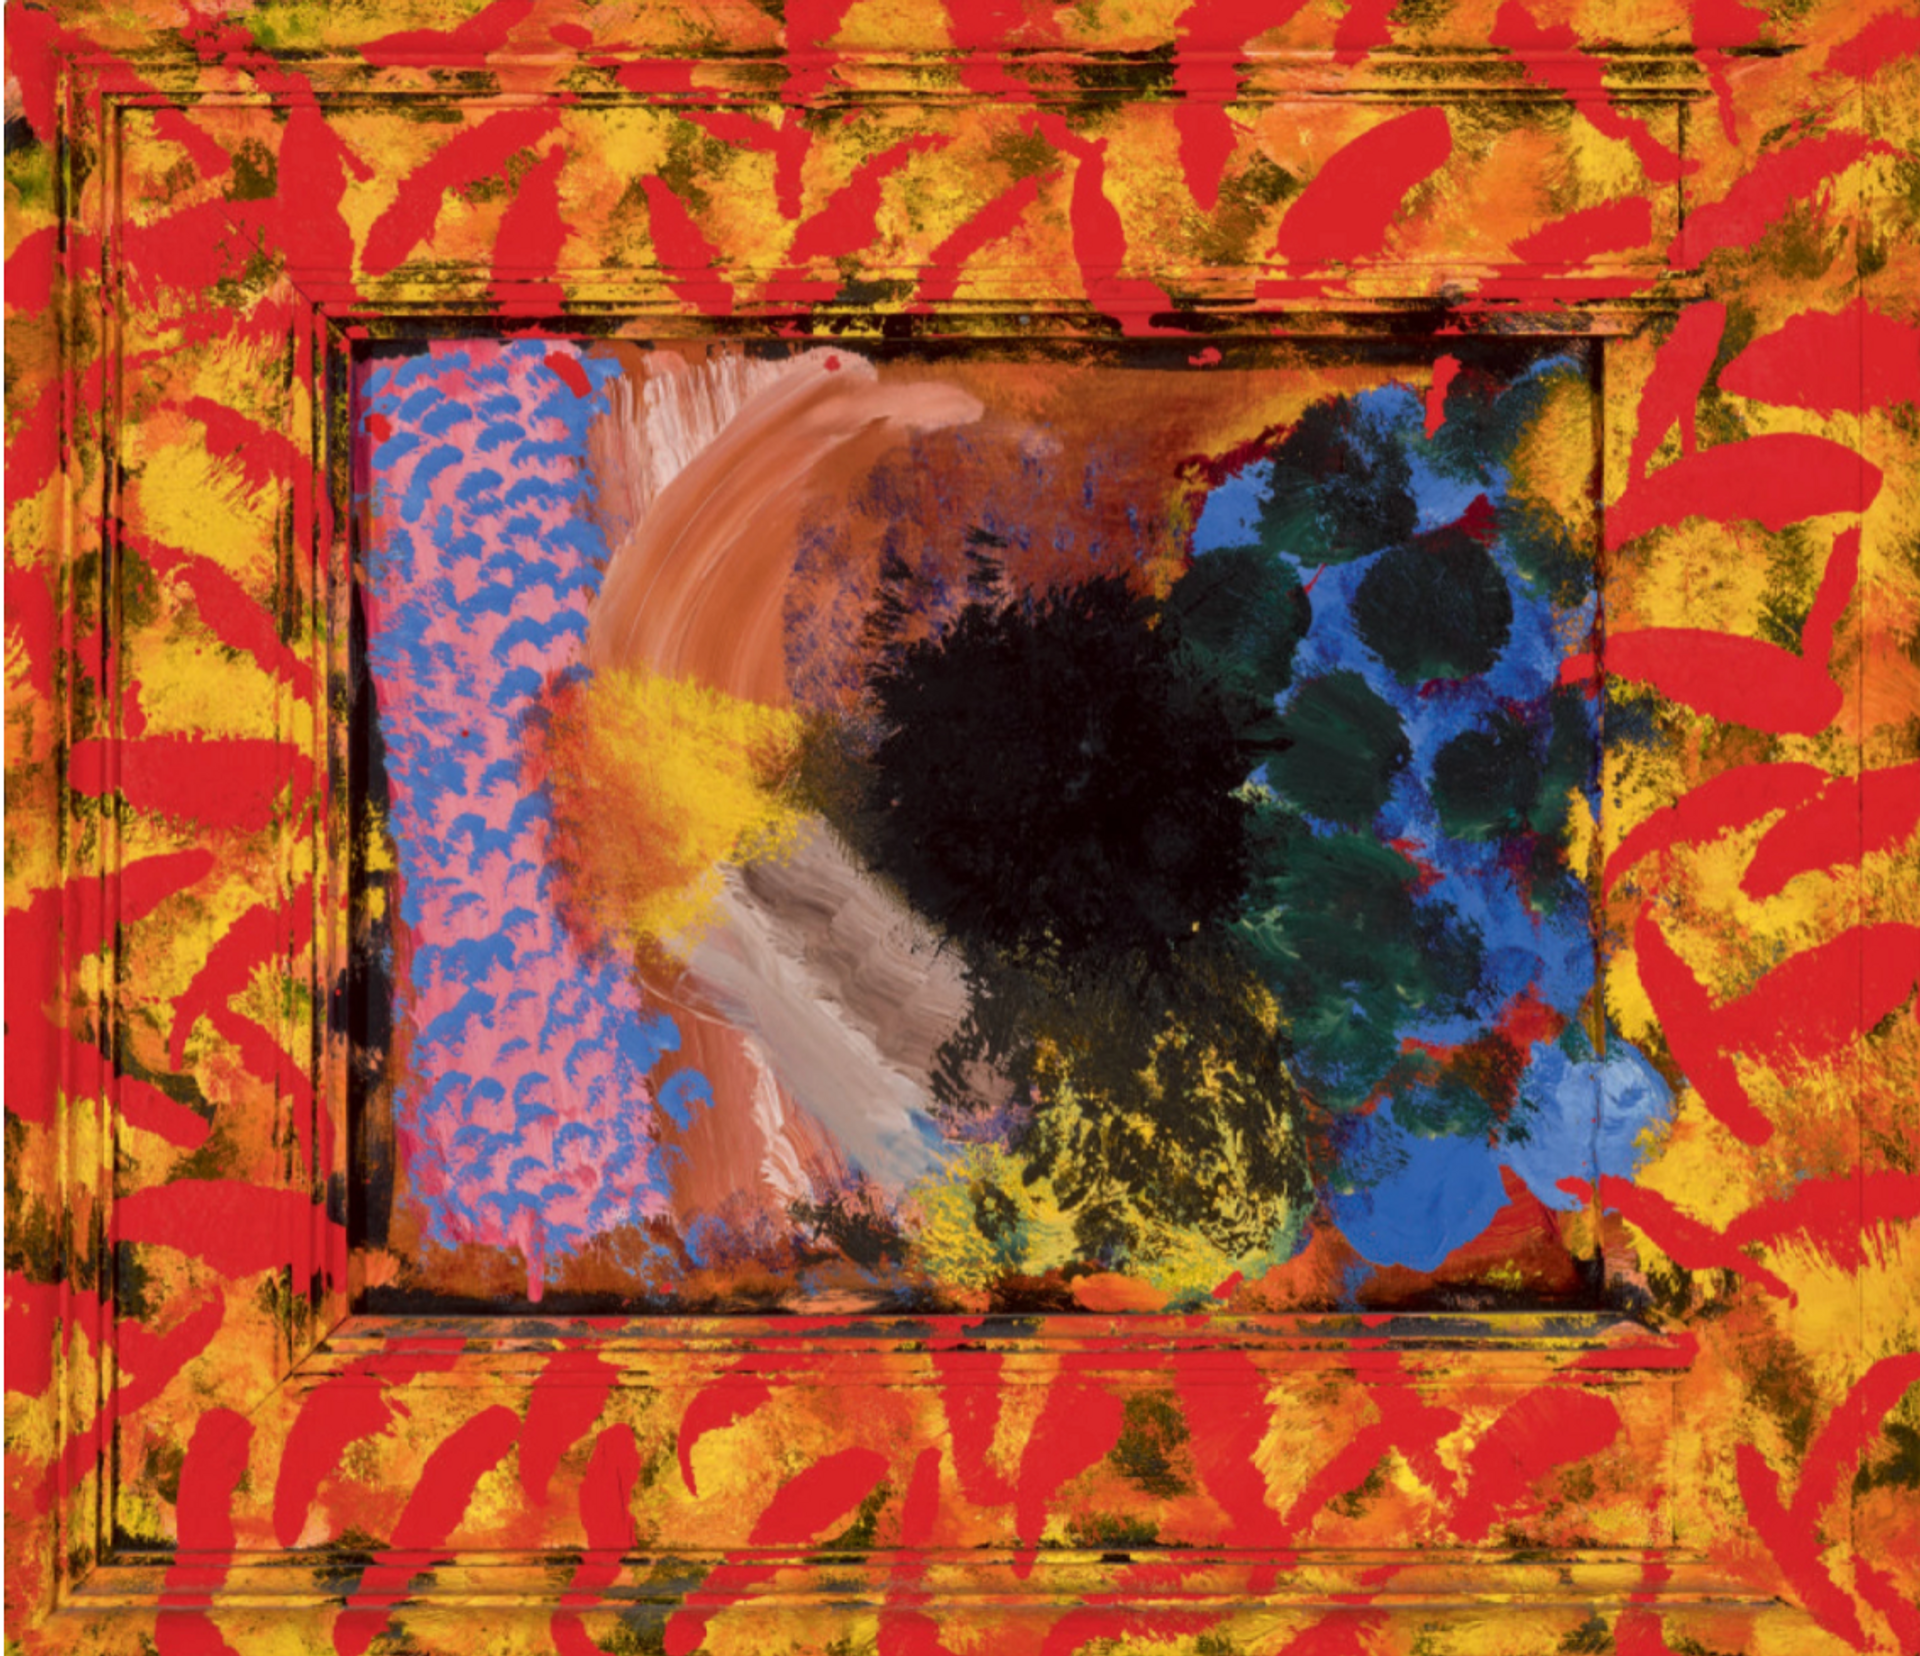 Counting The Days by Howard Hodgkin